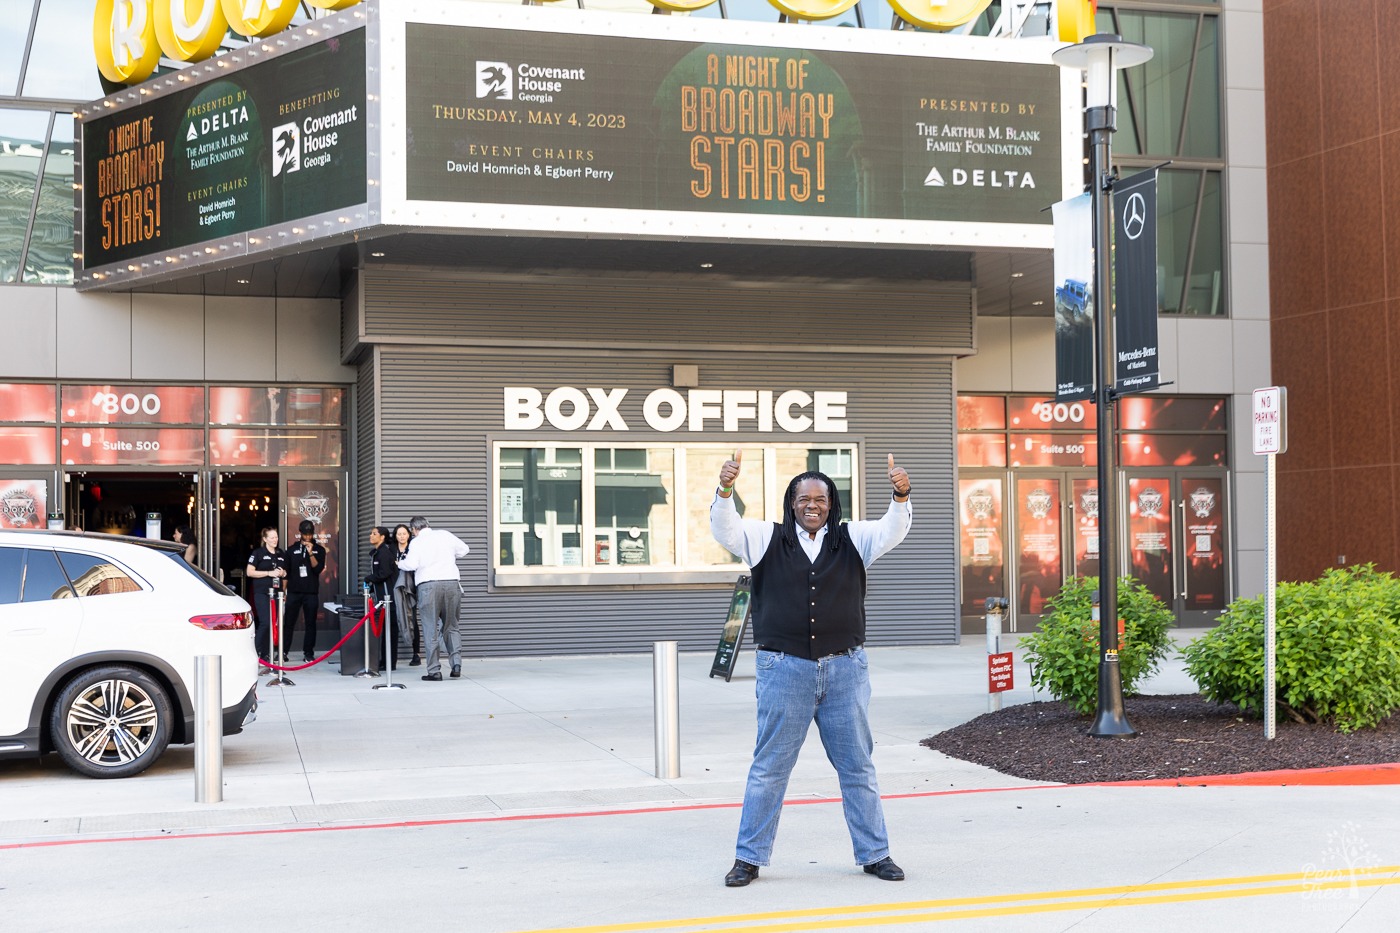 Broadway star Roosevelt Credit standing in front of Atlanta Coca Cola Roxy at the Battery with two thumbs up